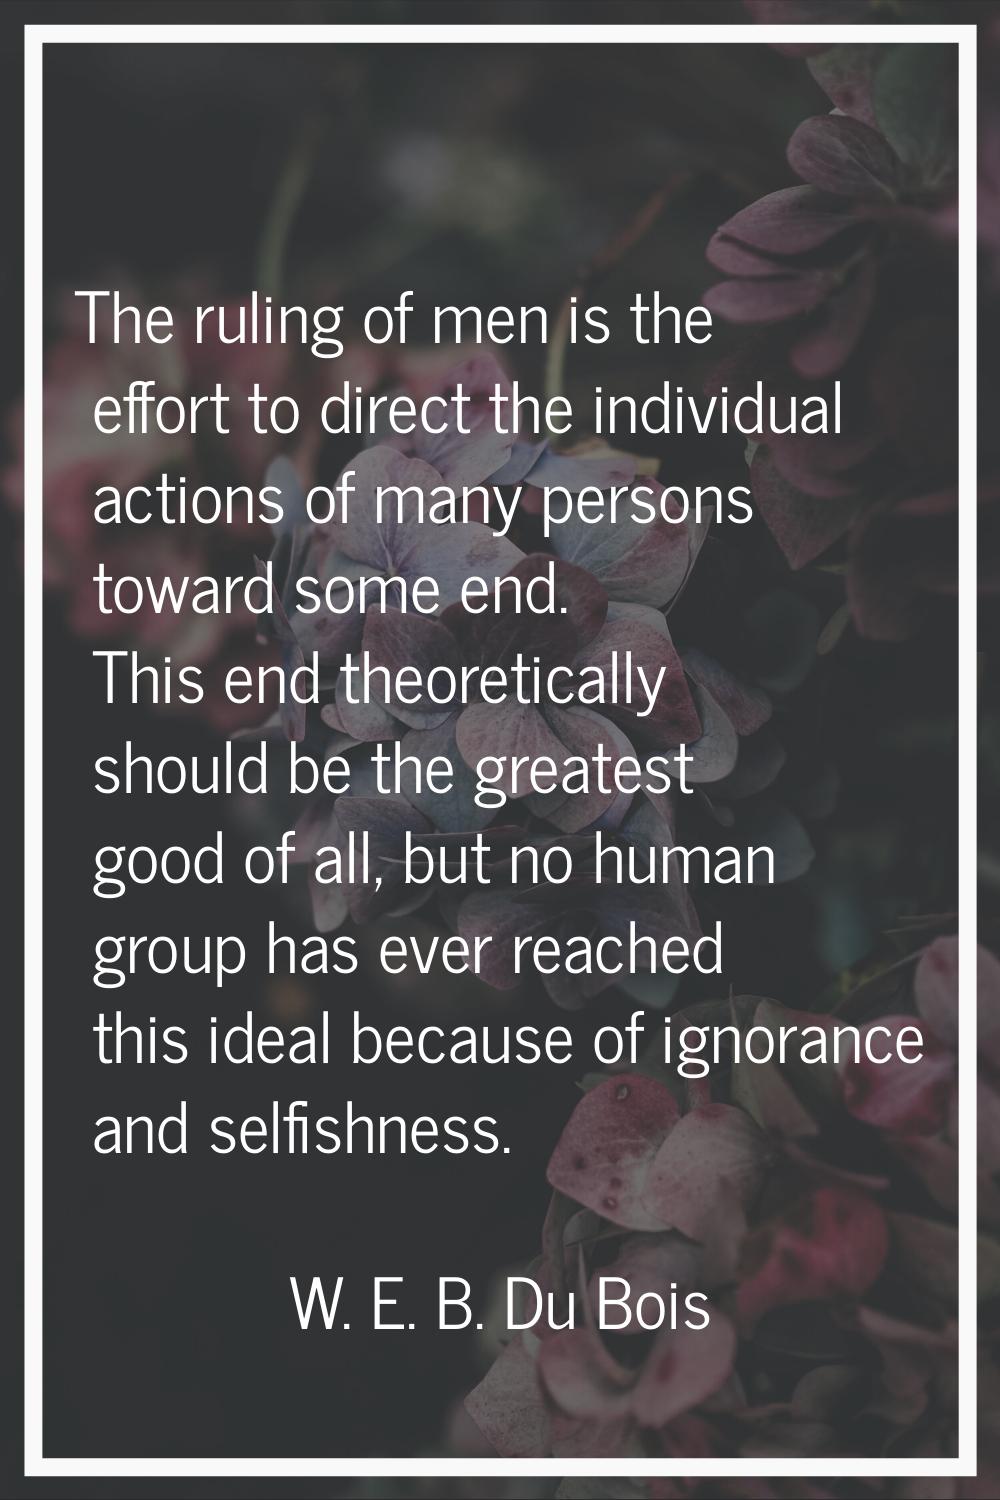 The ruling of men is the effort to direct the individual actions of many persons toward some end. T